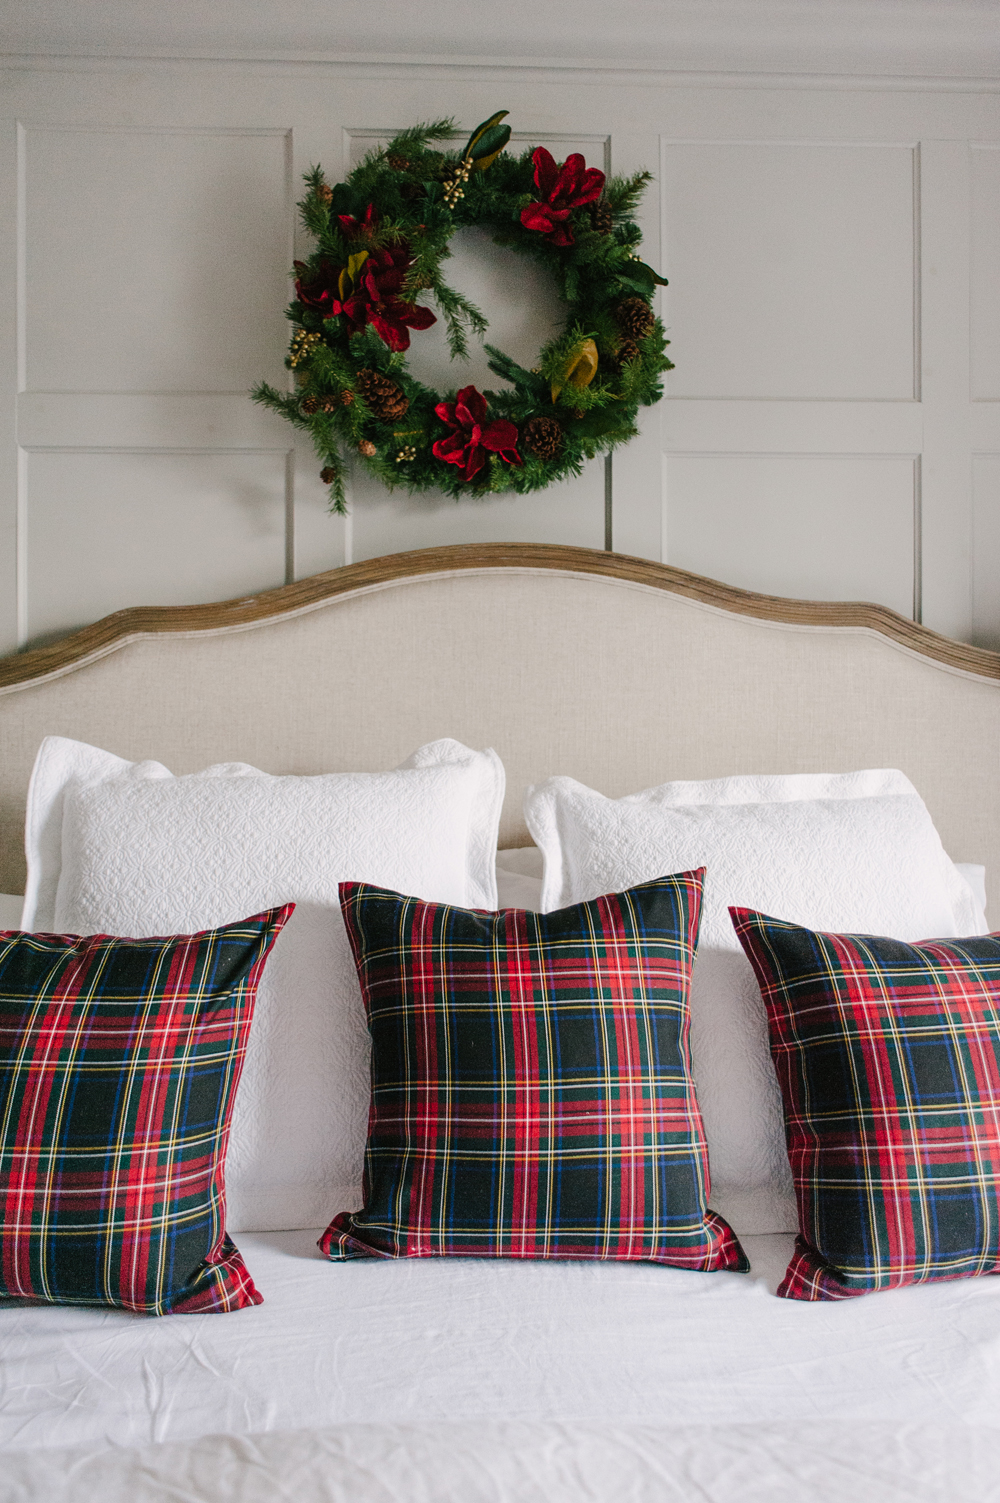 Three plaid pillows arranged on a cozy bed